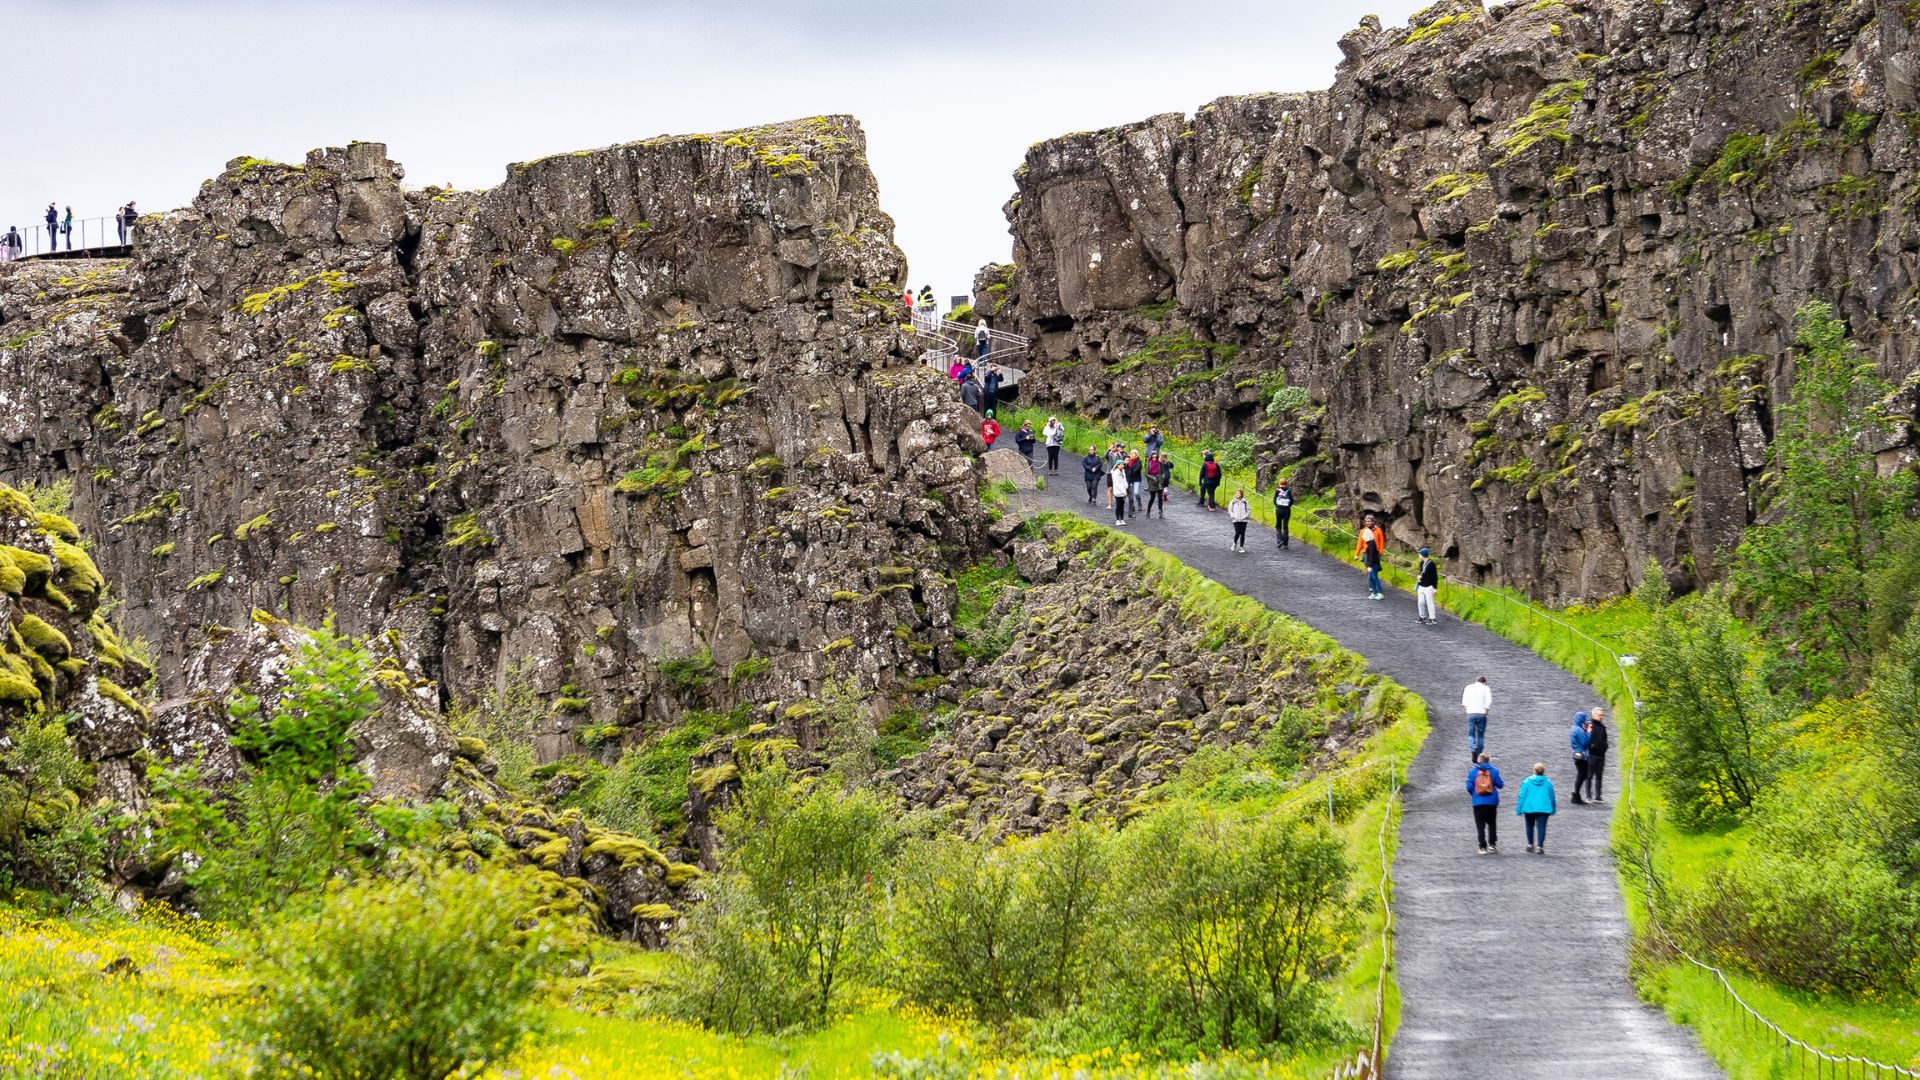 Tectonic plates in Iceland